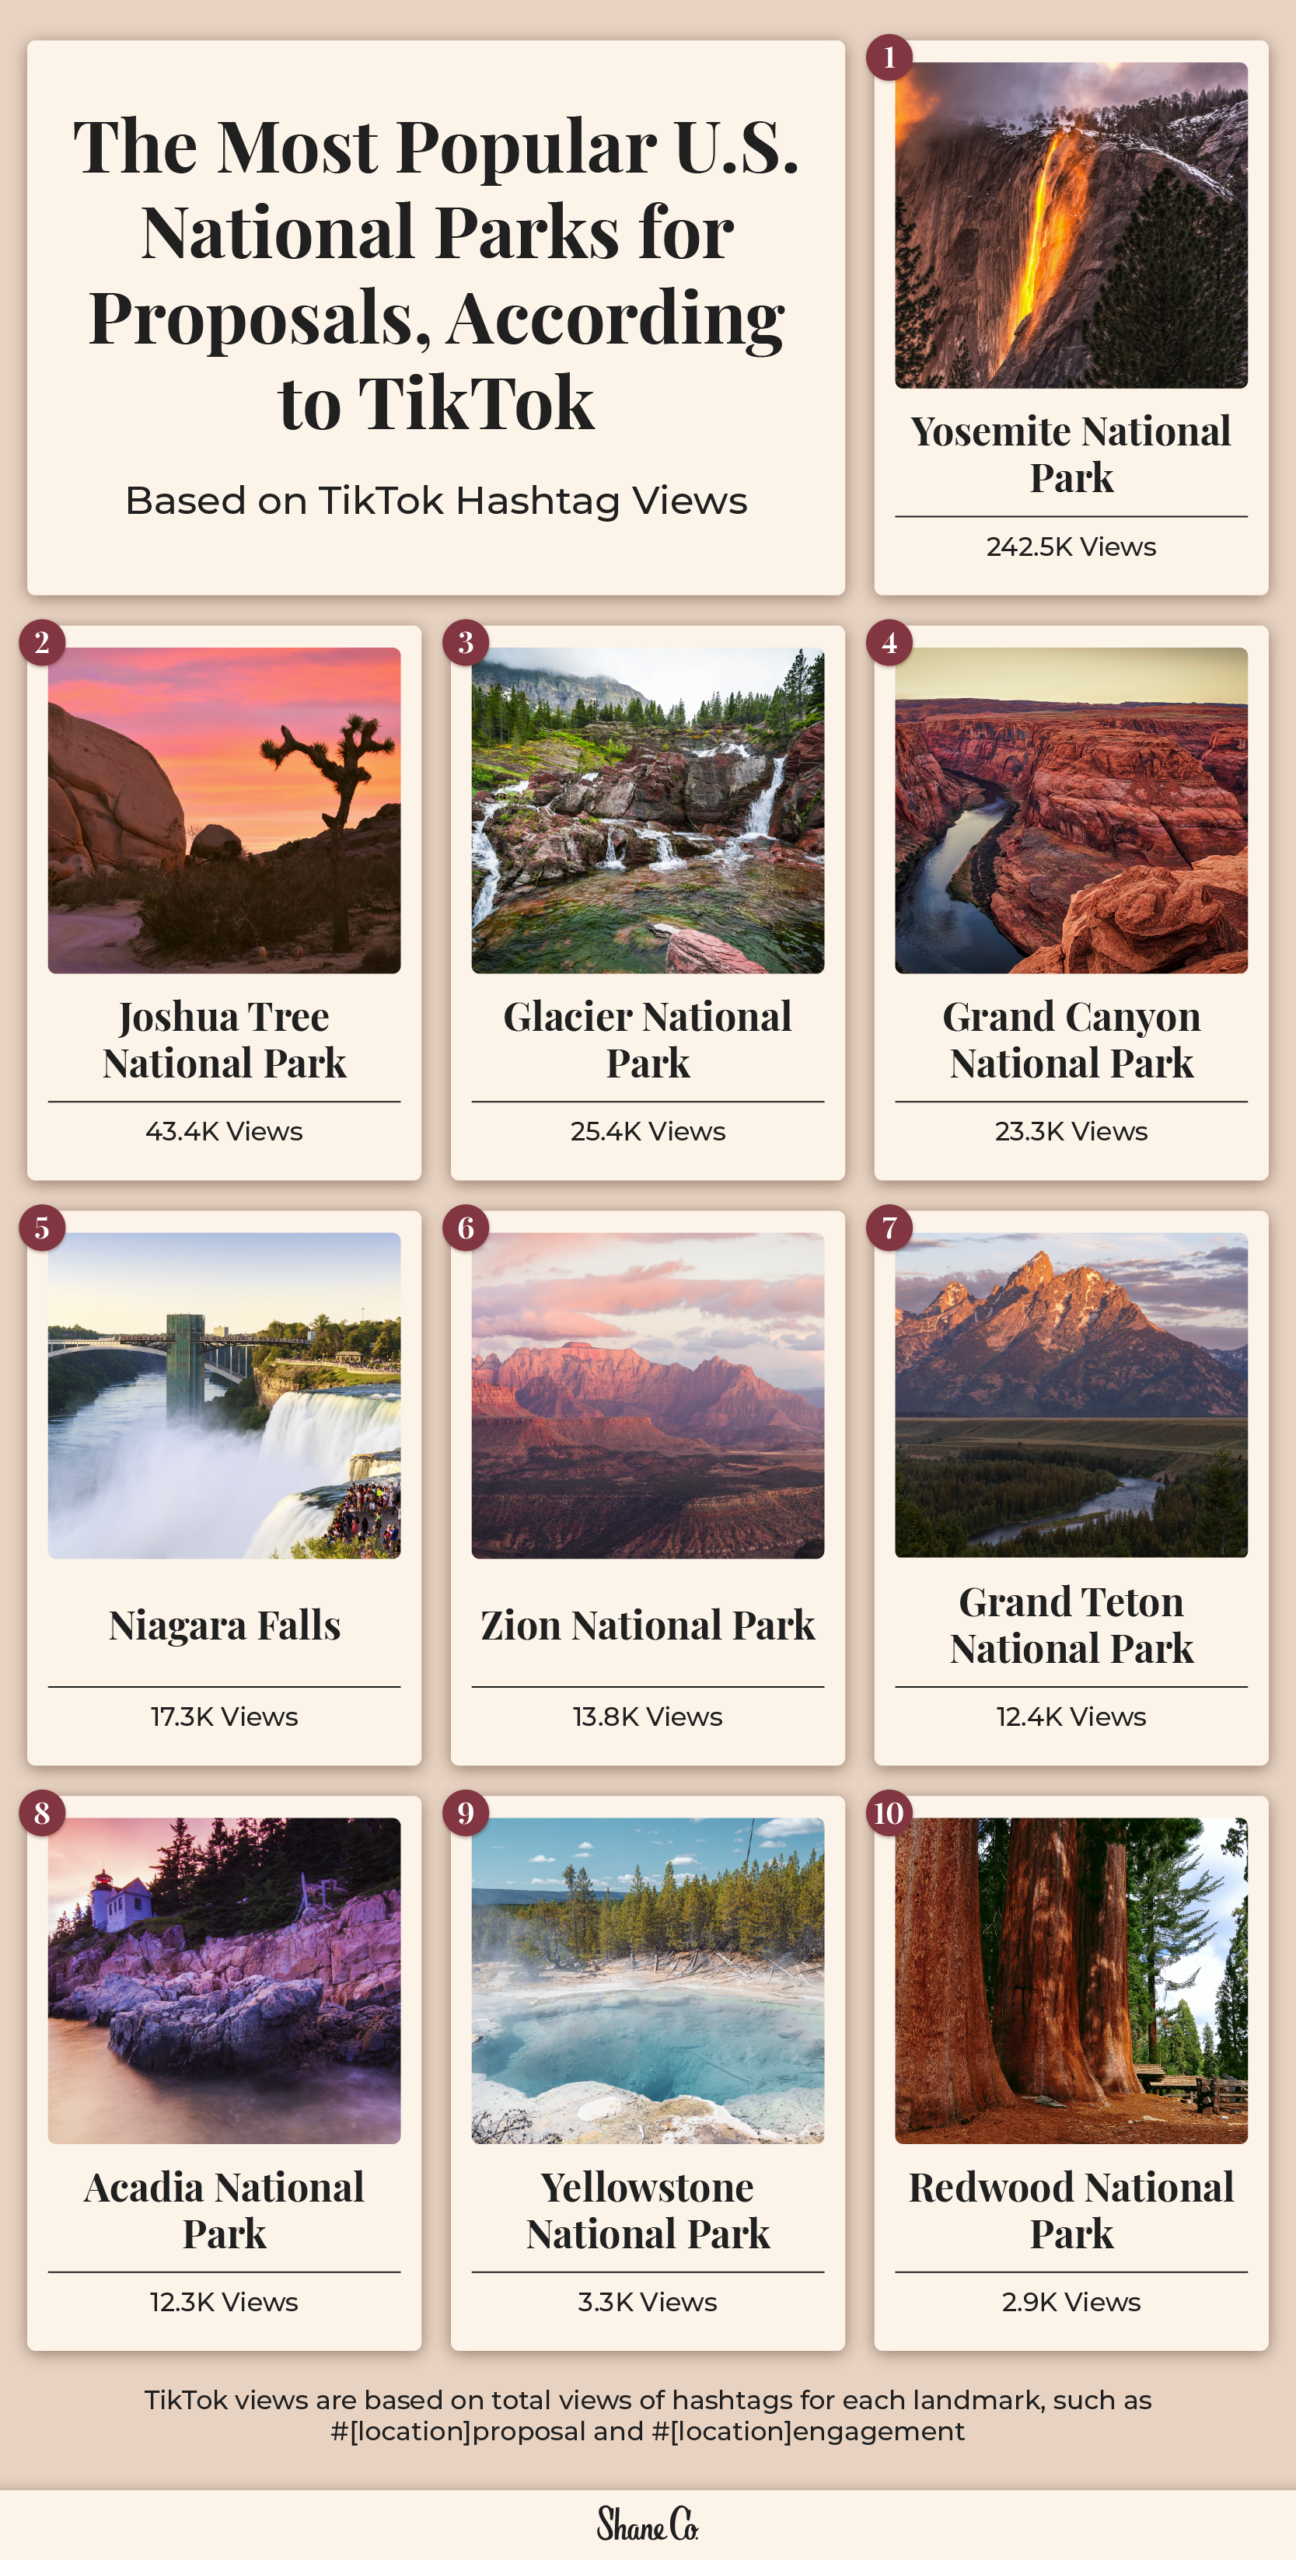 A graphic showing the most popular national parks for proposals based on TikTok views